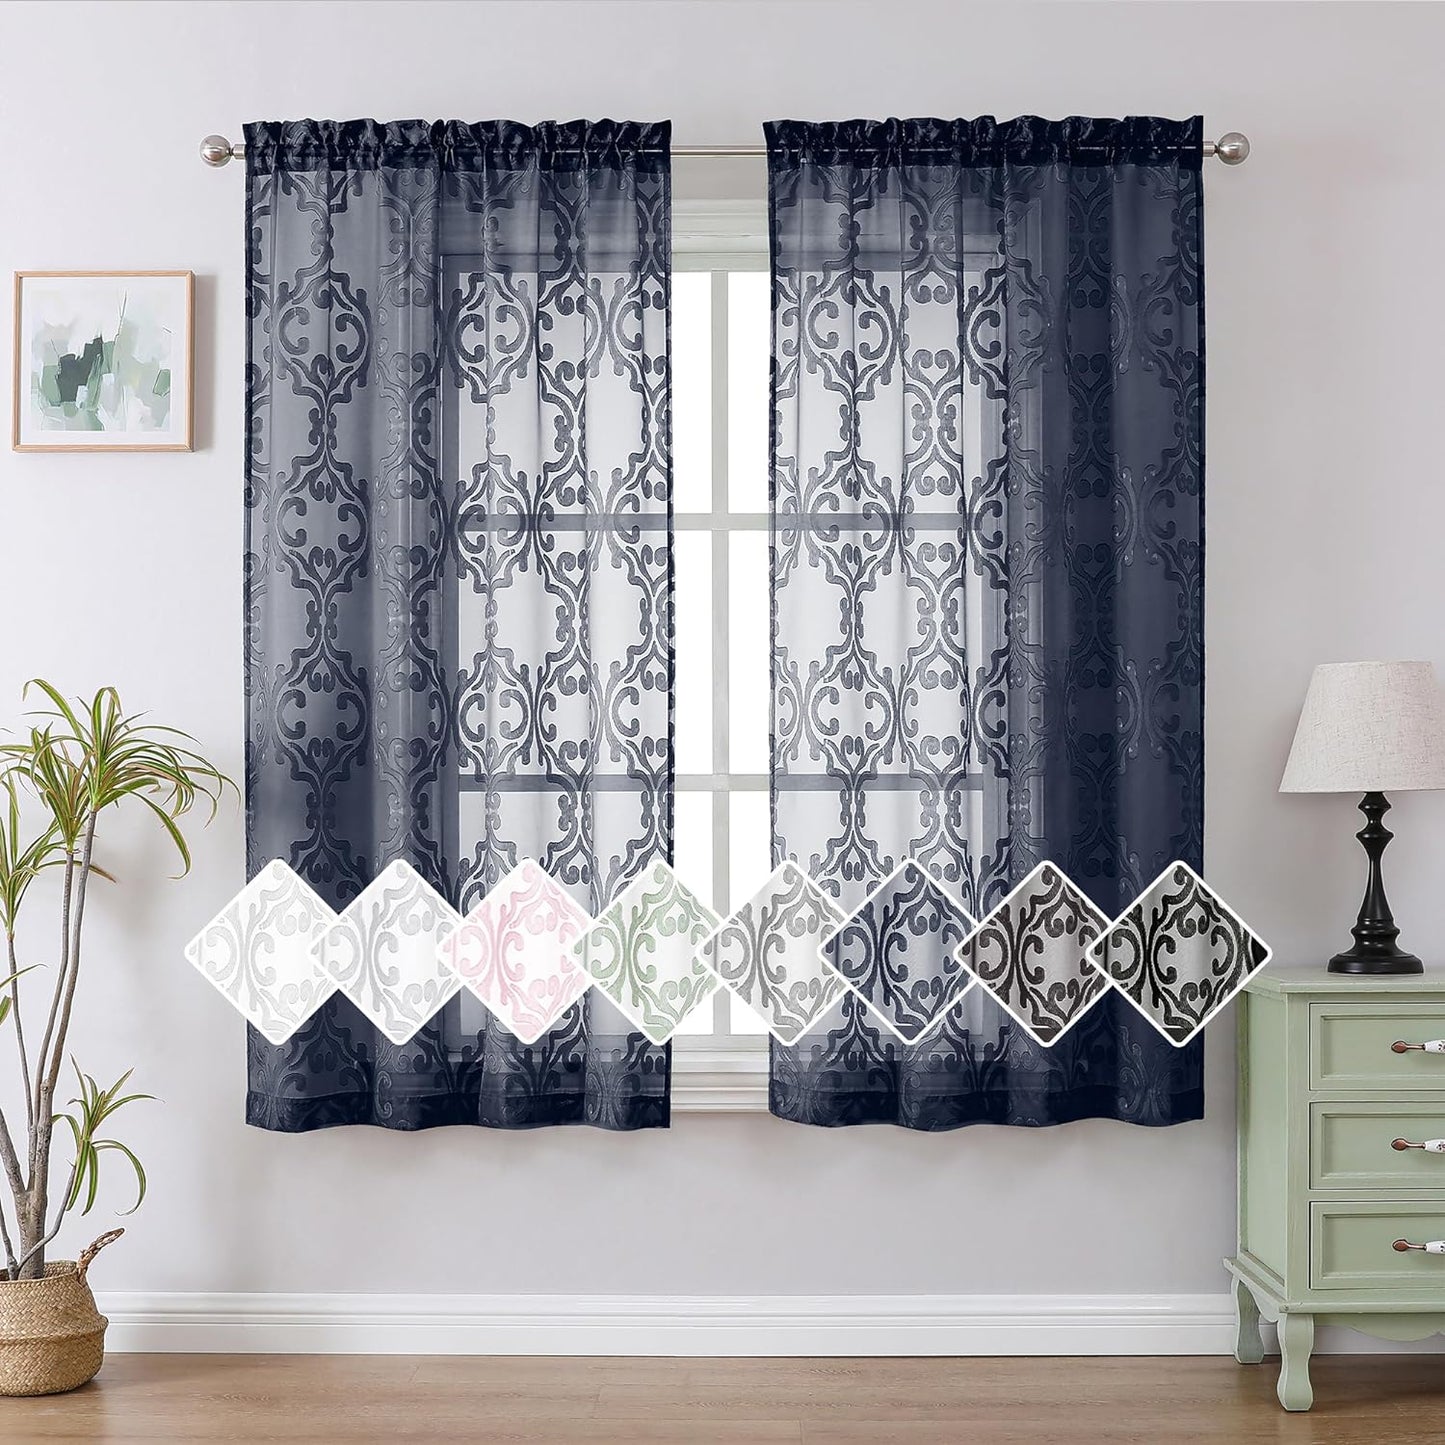 Aiyufeng Suri 2 Panels Sheer Sage Green Curtains 63 Inches Long, Light & Airy Privacy Textured Sheer Drapes, Dual Rod Pocket Voile Clipped Floral Luxury Panels for Bedroom Living Room, 42 X 63 Inch  Aiyufeng Navy Blue 2X42X63" 